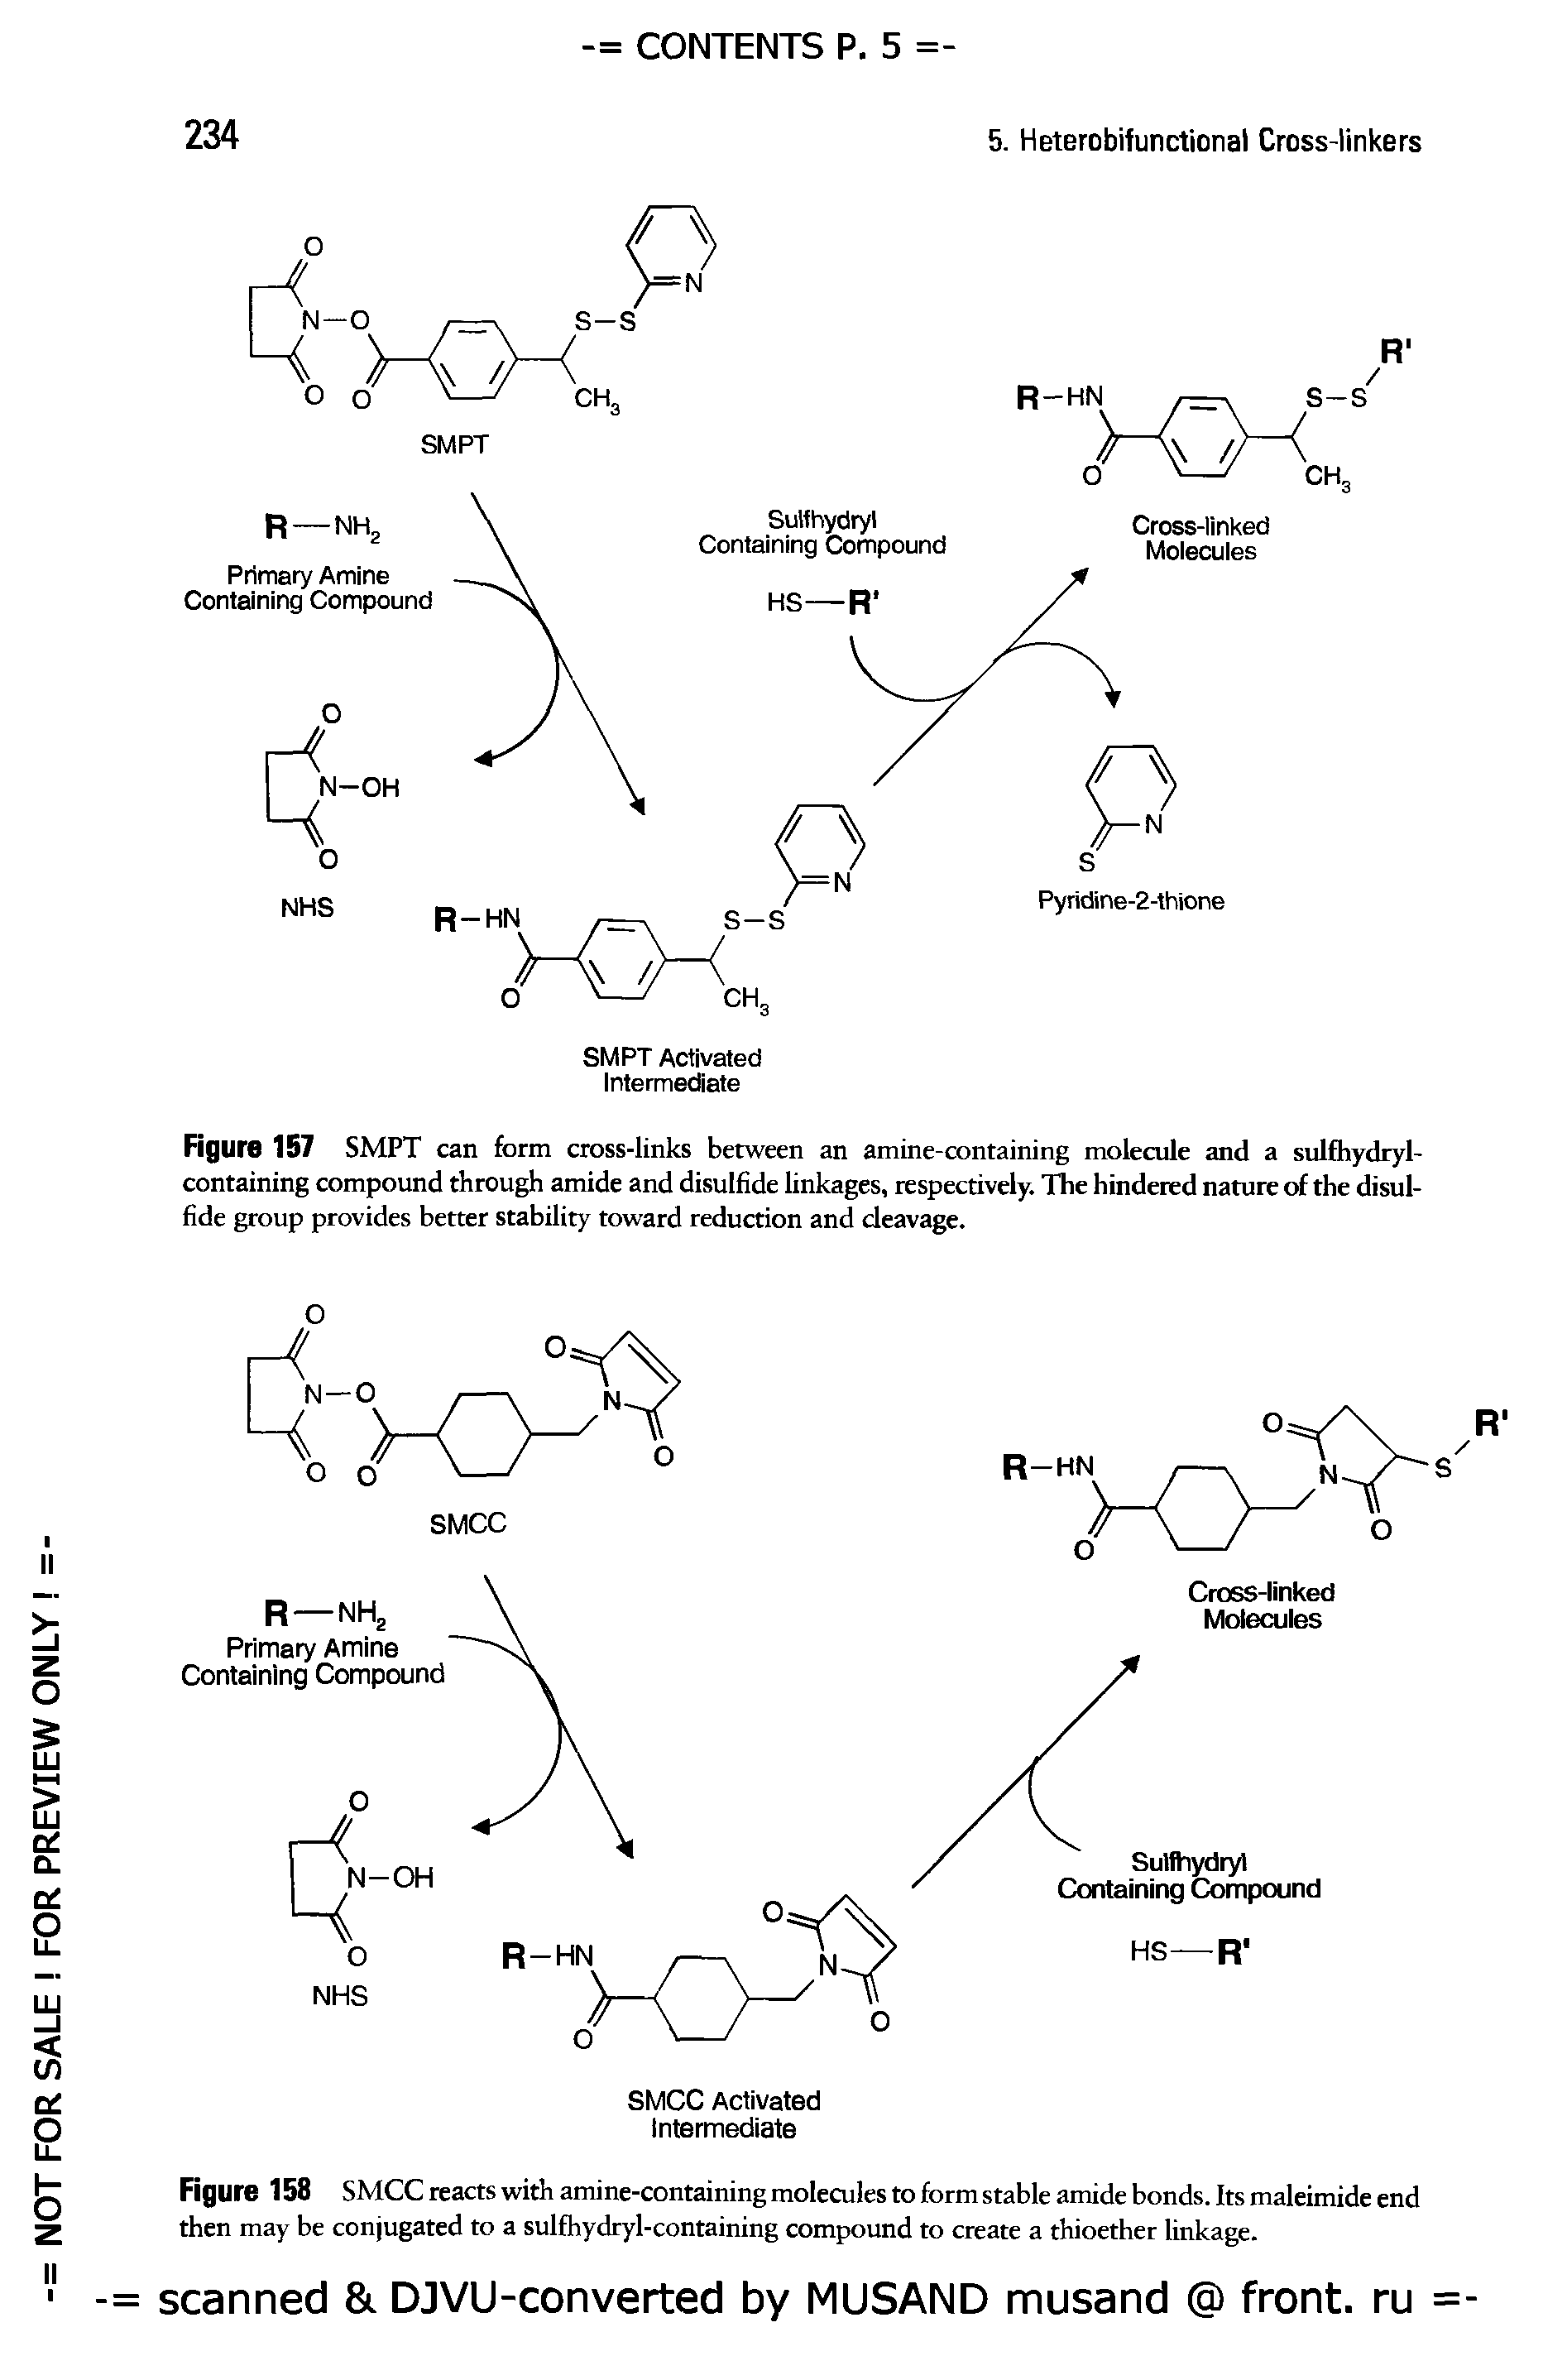 Figure 157 SMPT can form cross-links between an amine-containing molecule and a sulfhydryl-containing compound through amide and disulfide linkages, respectively. The hindered nature of the disulfide group provides better stability toward reduction and cleavage.